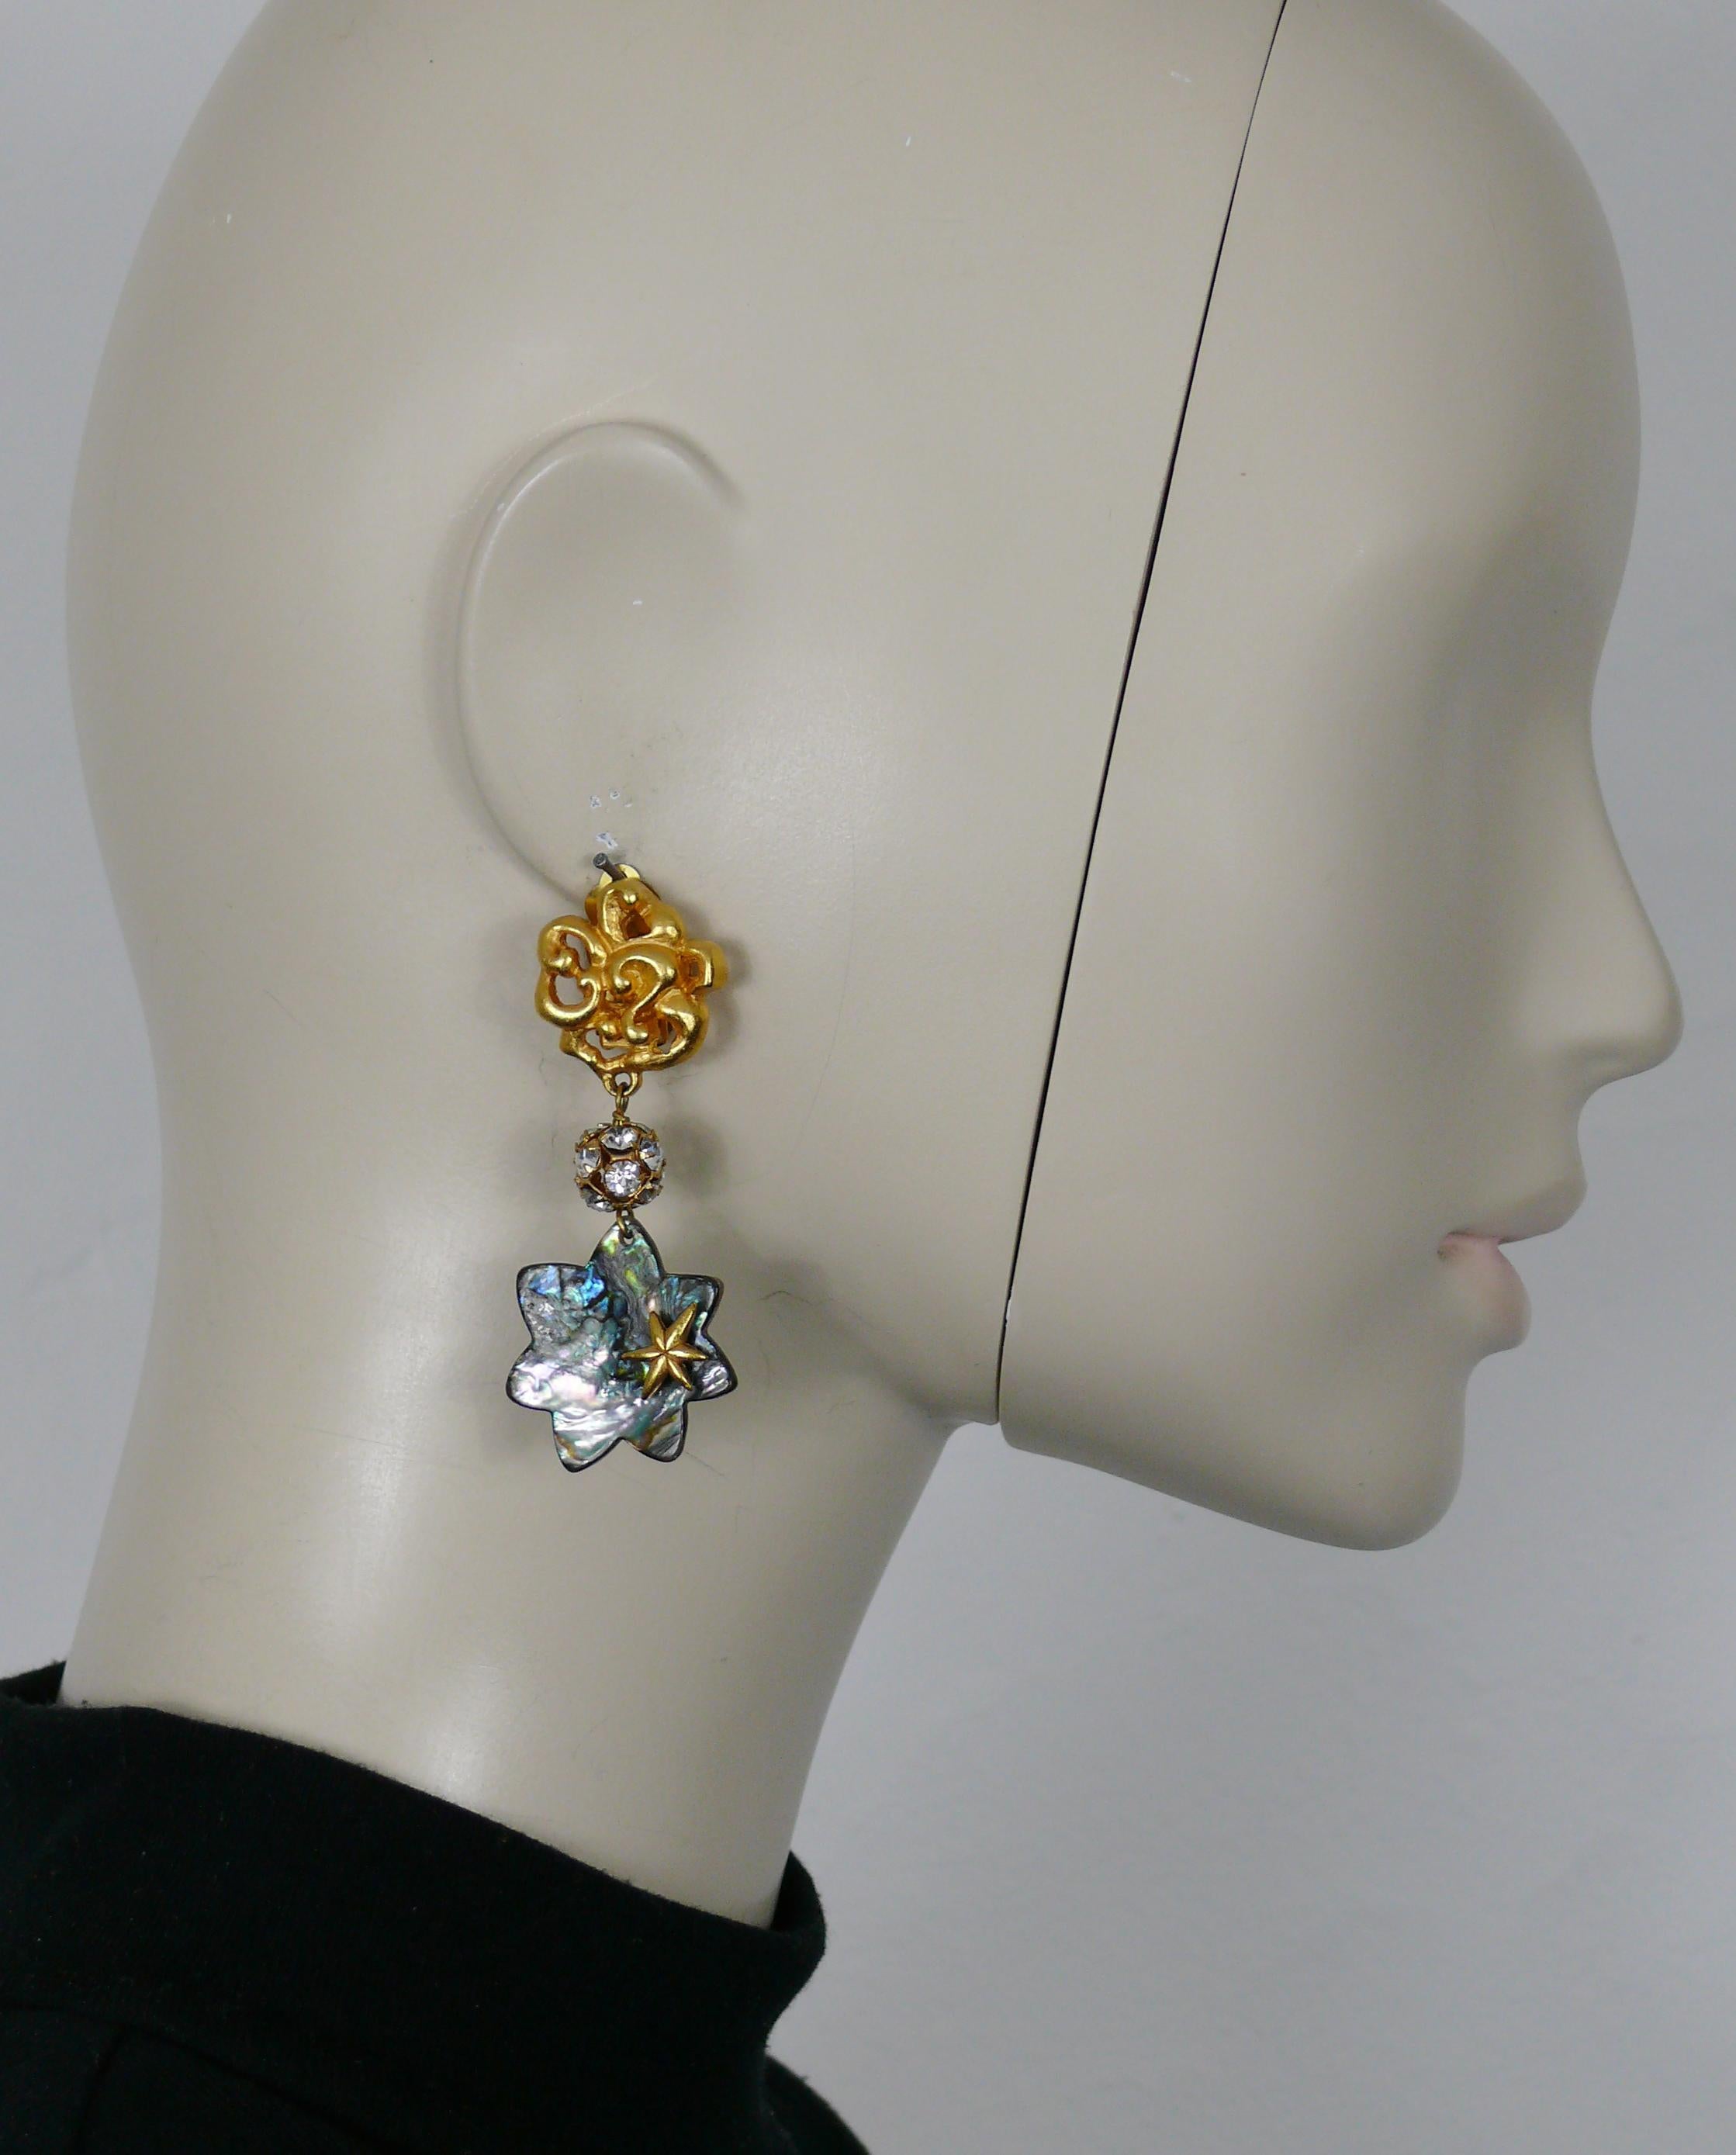 CHRISTIAN LACROIX vintage dangling earrings (clip-on) featuring a gold tone top, crystal ball and iridescent star.

Marked CHRISTIAN LACROIX CL Made in France.

Indicative measurements : max. height approx. 6.5 cm (2.56 inches) / max. width approx